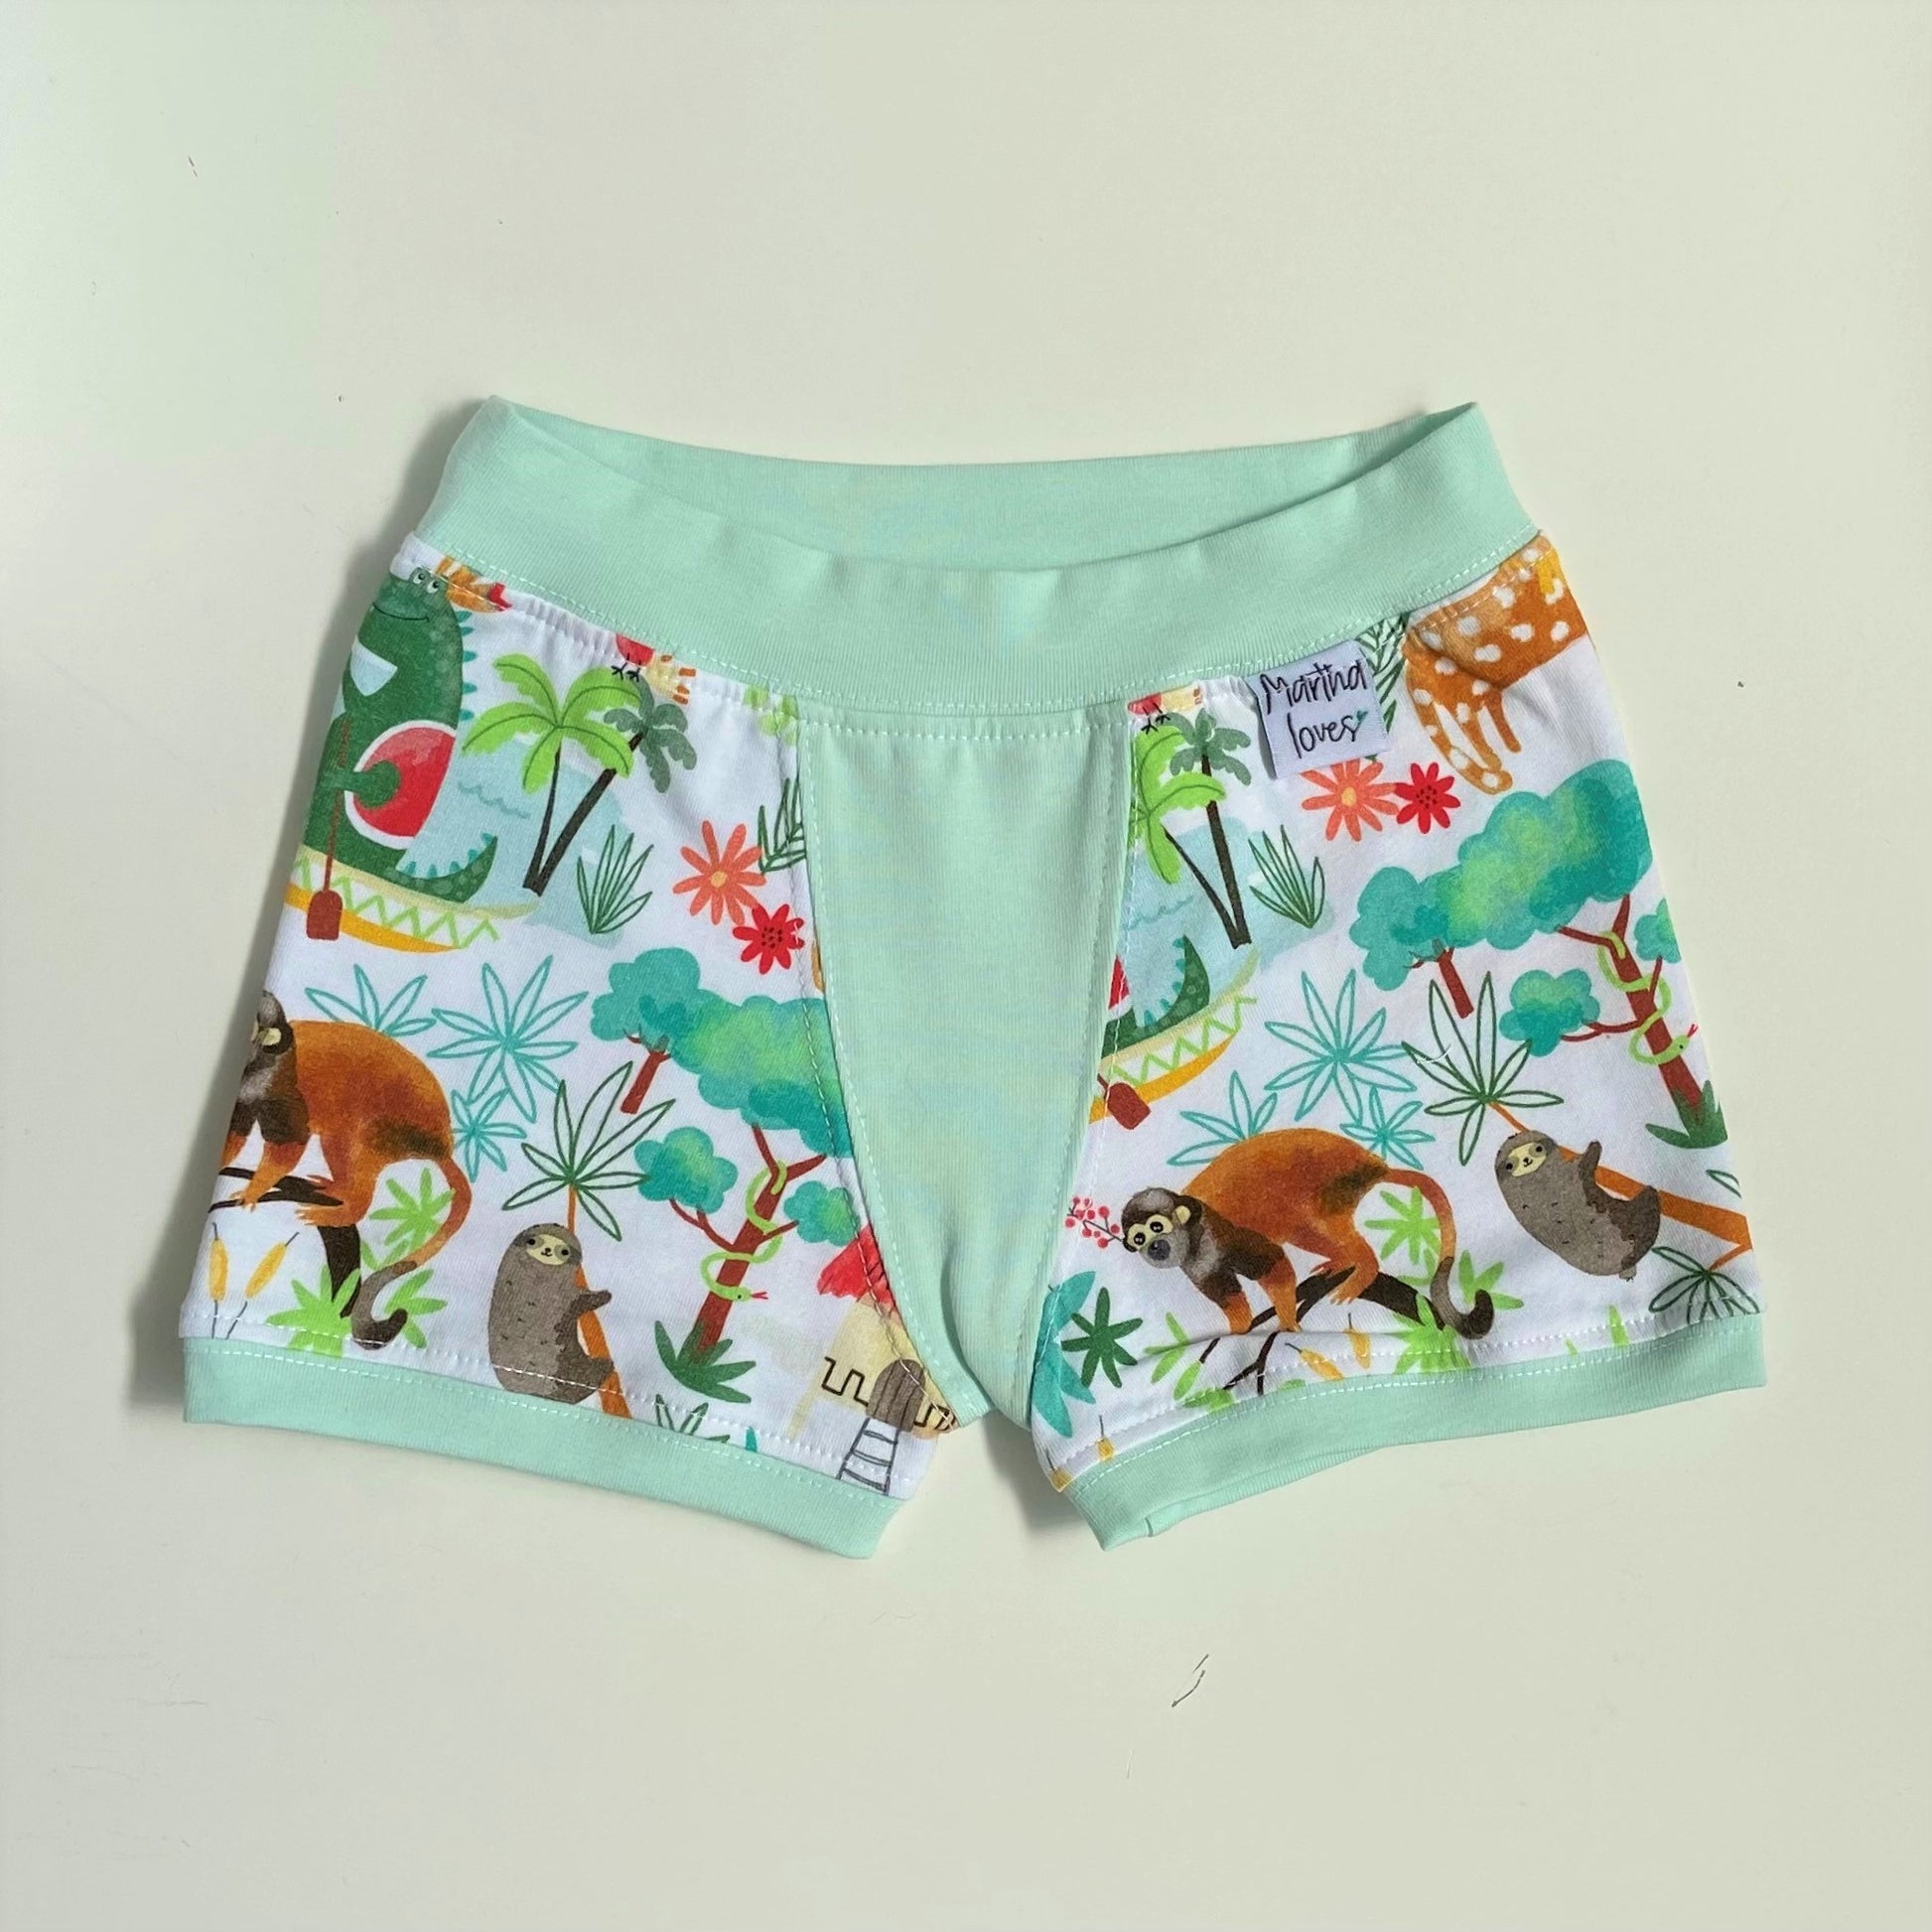 martha loves boxer shorts with jungle print and mint green trim